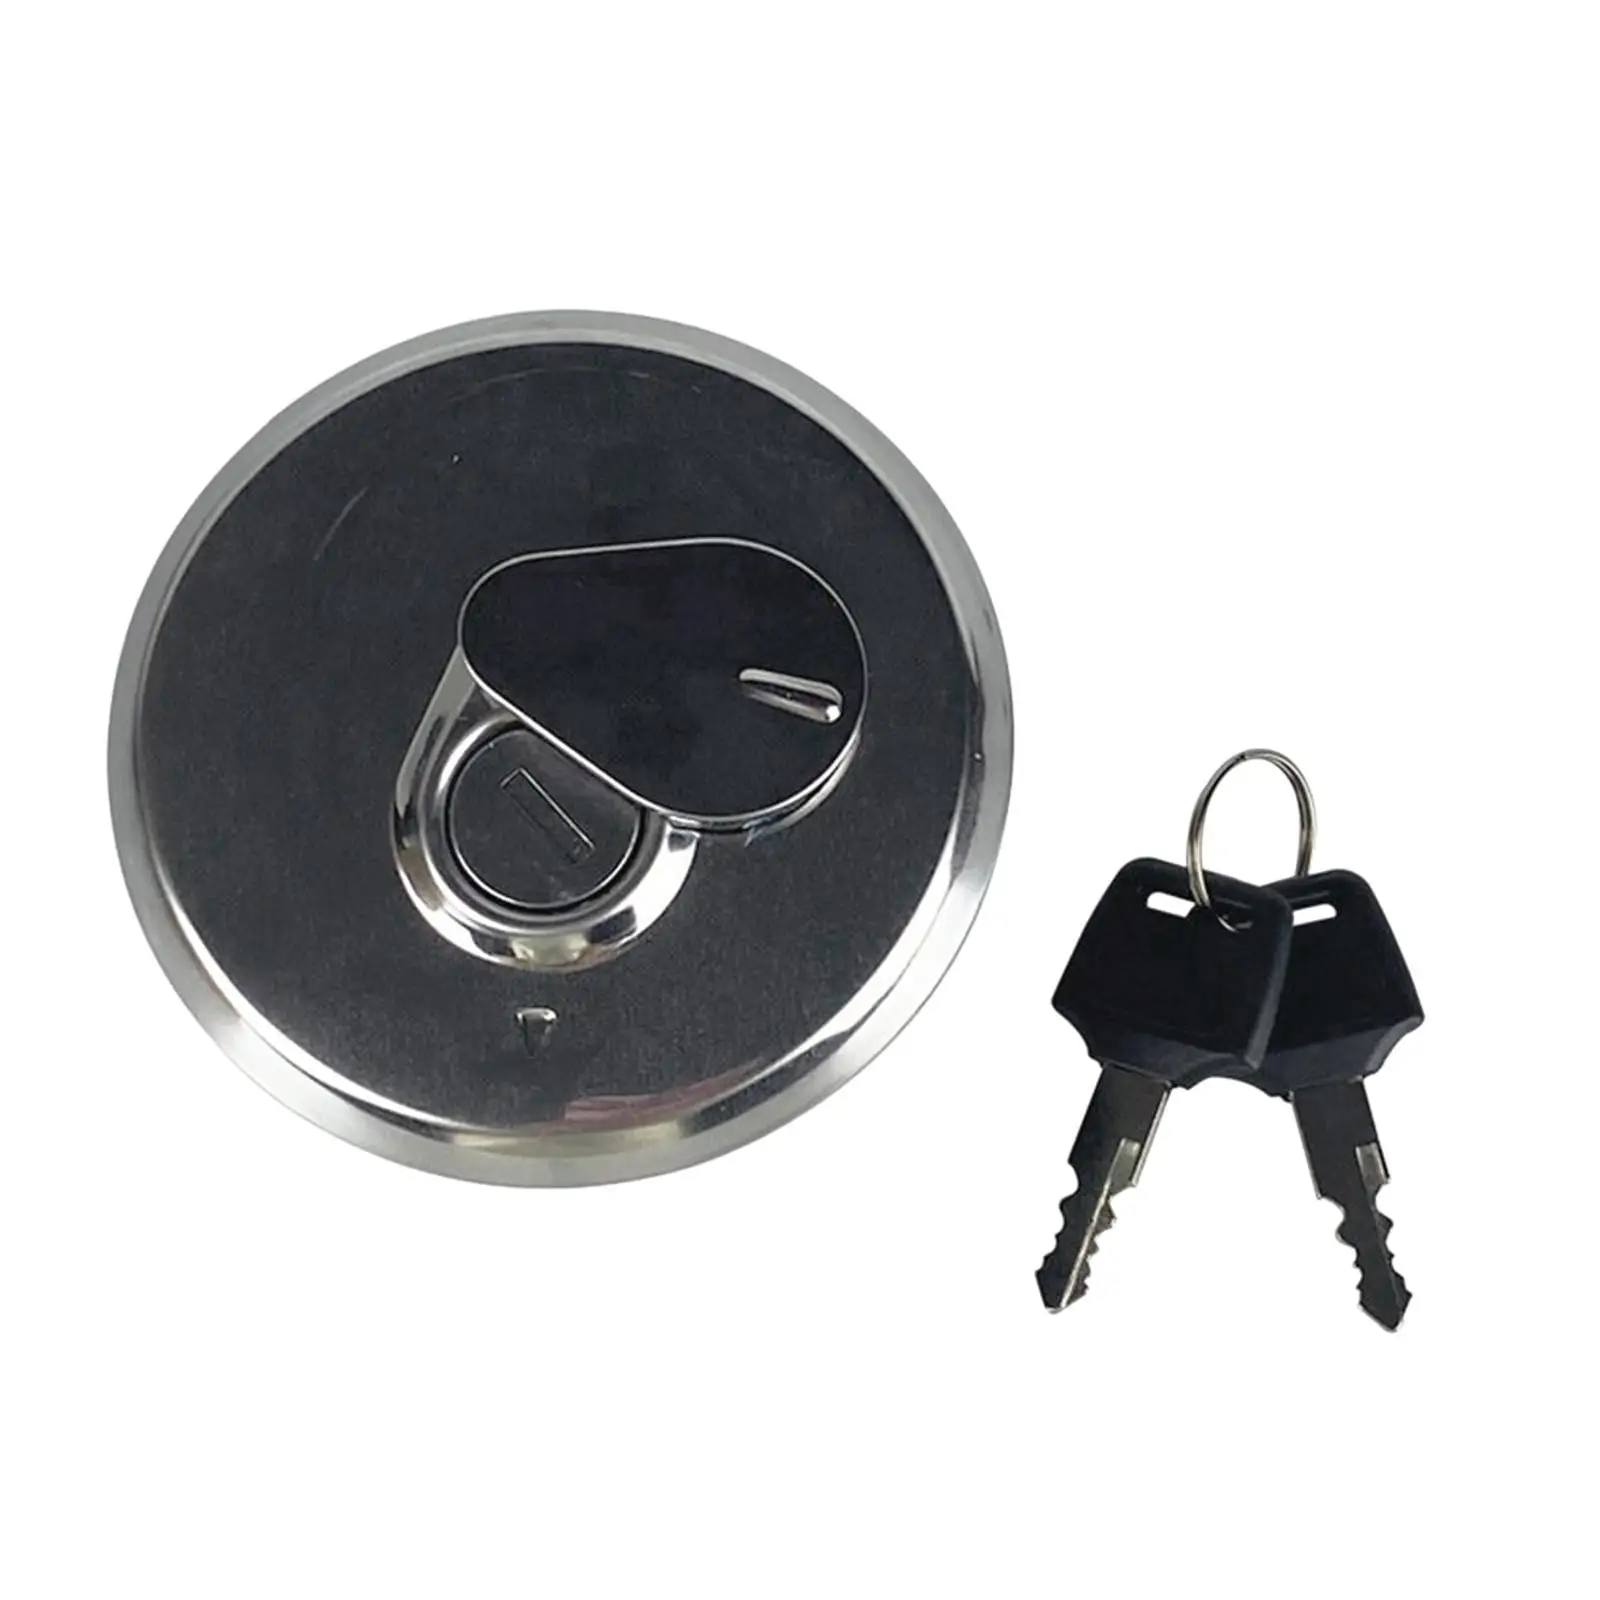 Motorcycle Fuel Gas Tank Cap Cover with Keys for Suzuki Gn125 Durable Parts